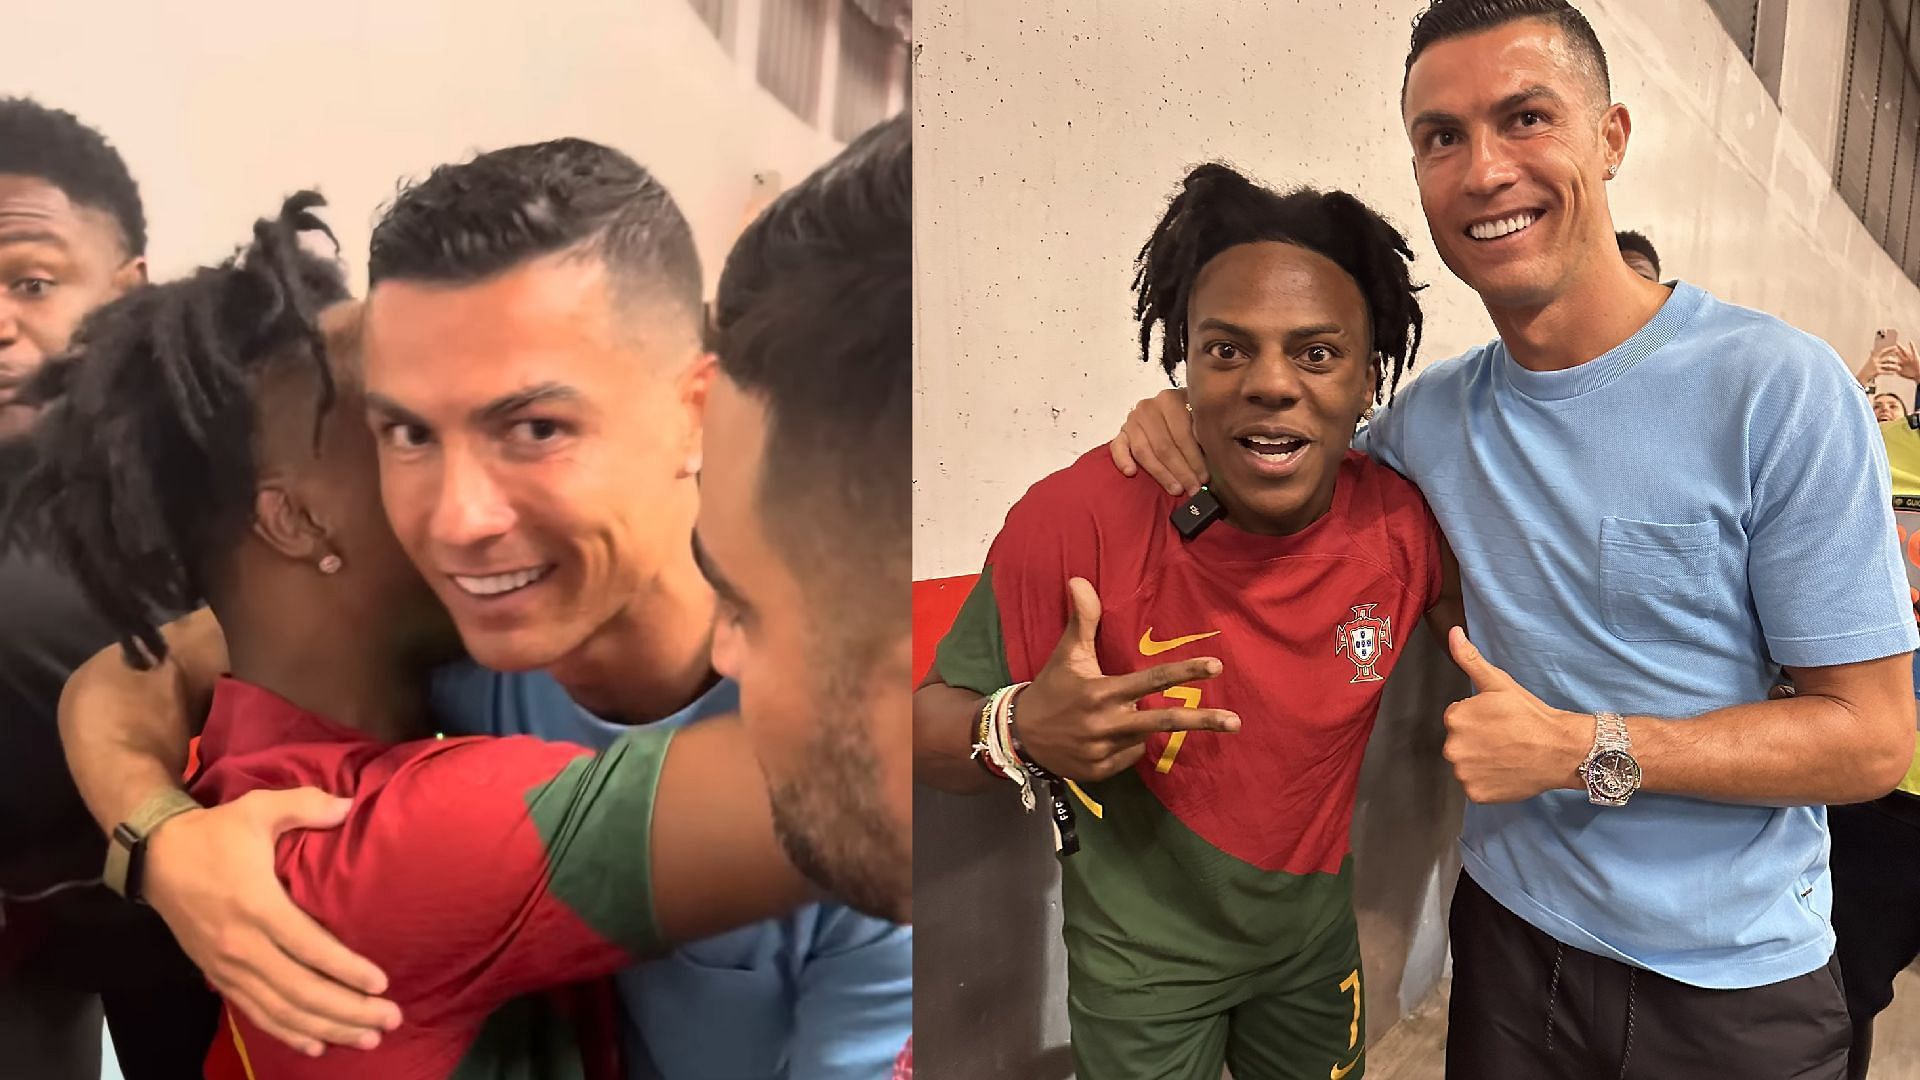 IShowSpeed's obsession with Cristiano Ronaldo: Tracing the YouTuber's journey to meet his idol